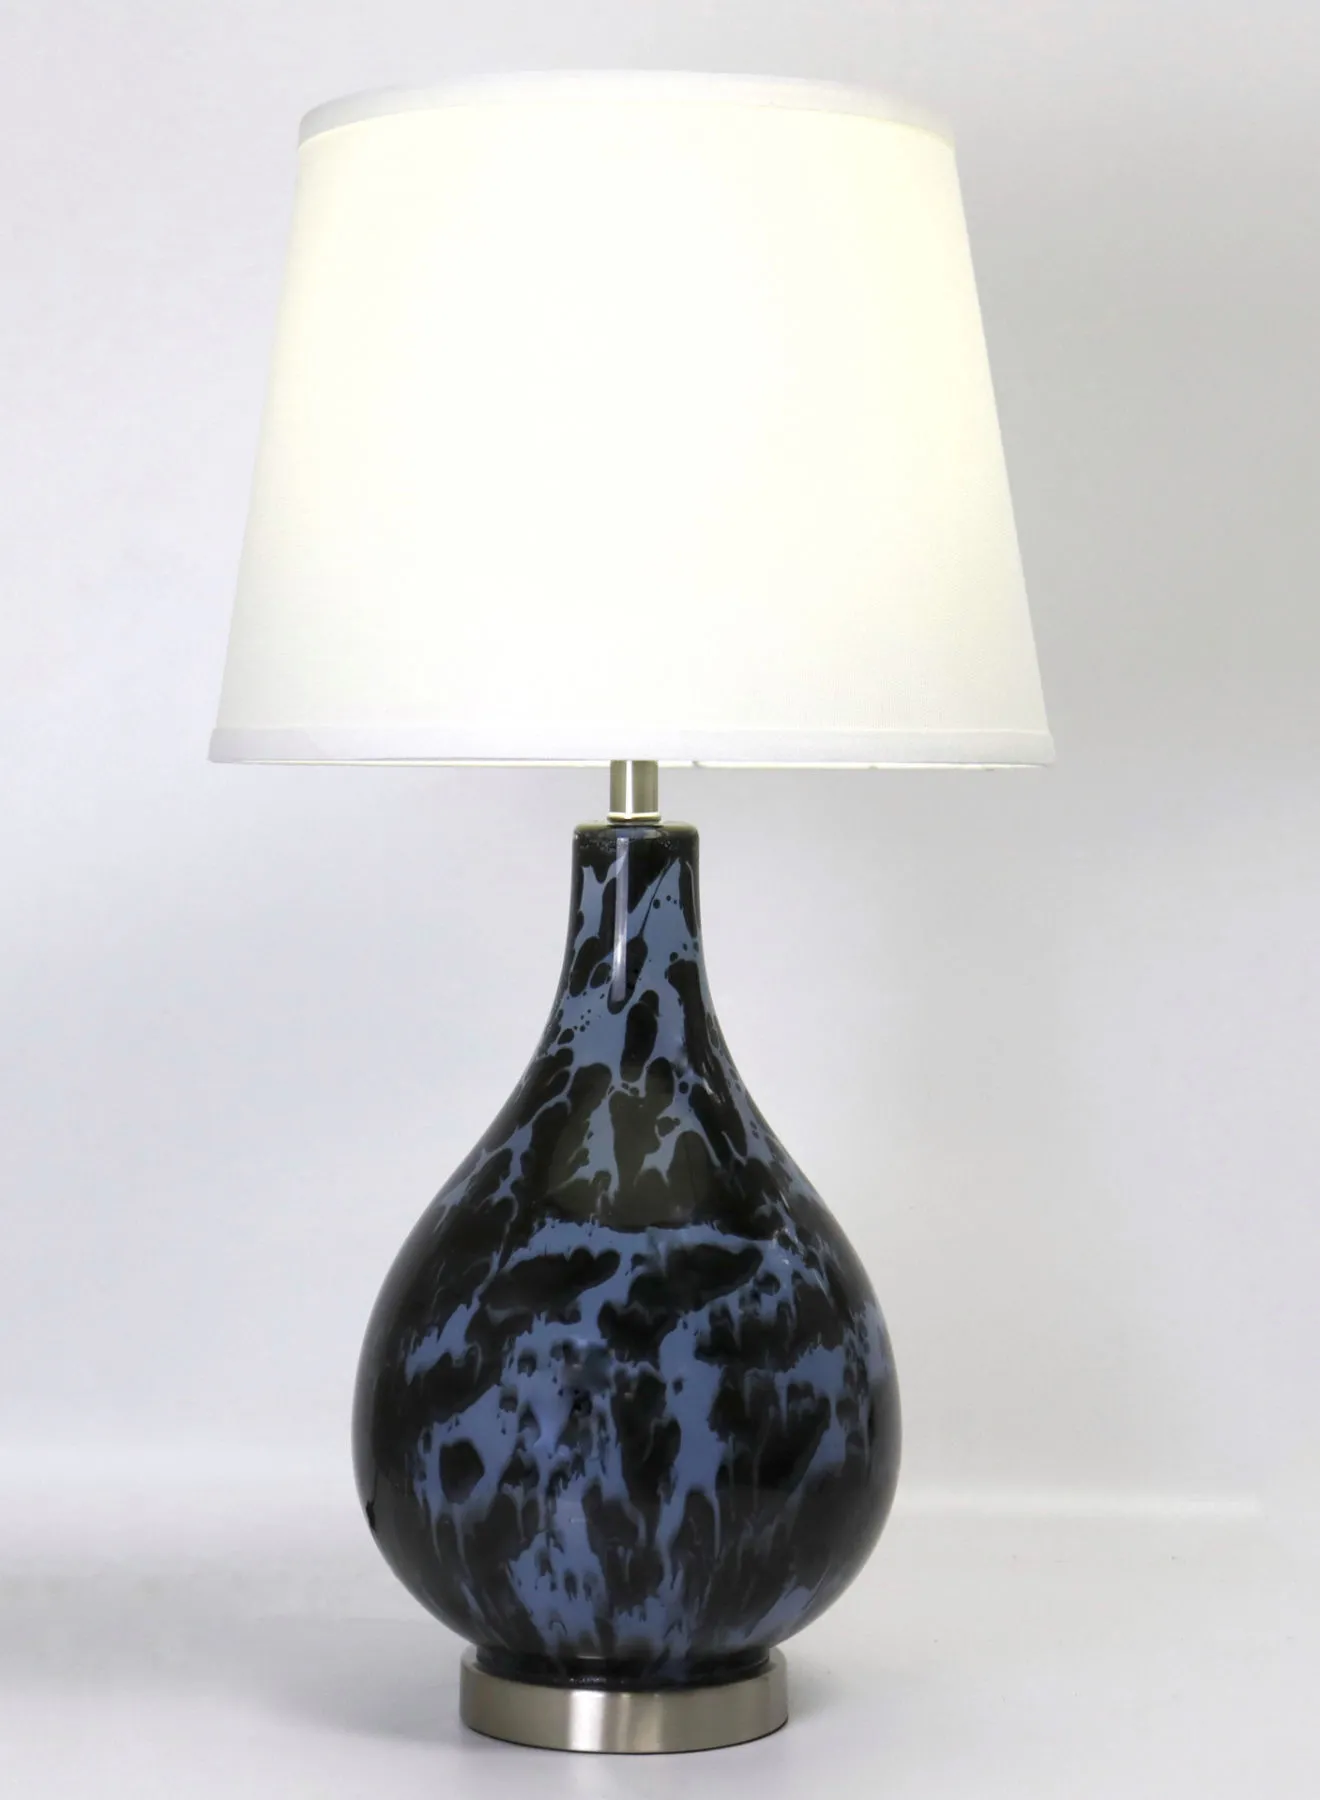 ebb & flow Modern Design Glass Table Lamp Unique Luxury Quality Material for the Perfect Stylish Home RS-N71009-C Blue/Black 13 x 24.5